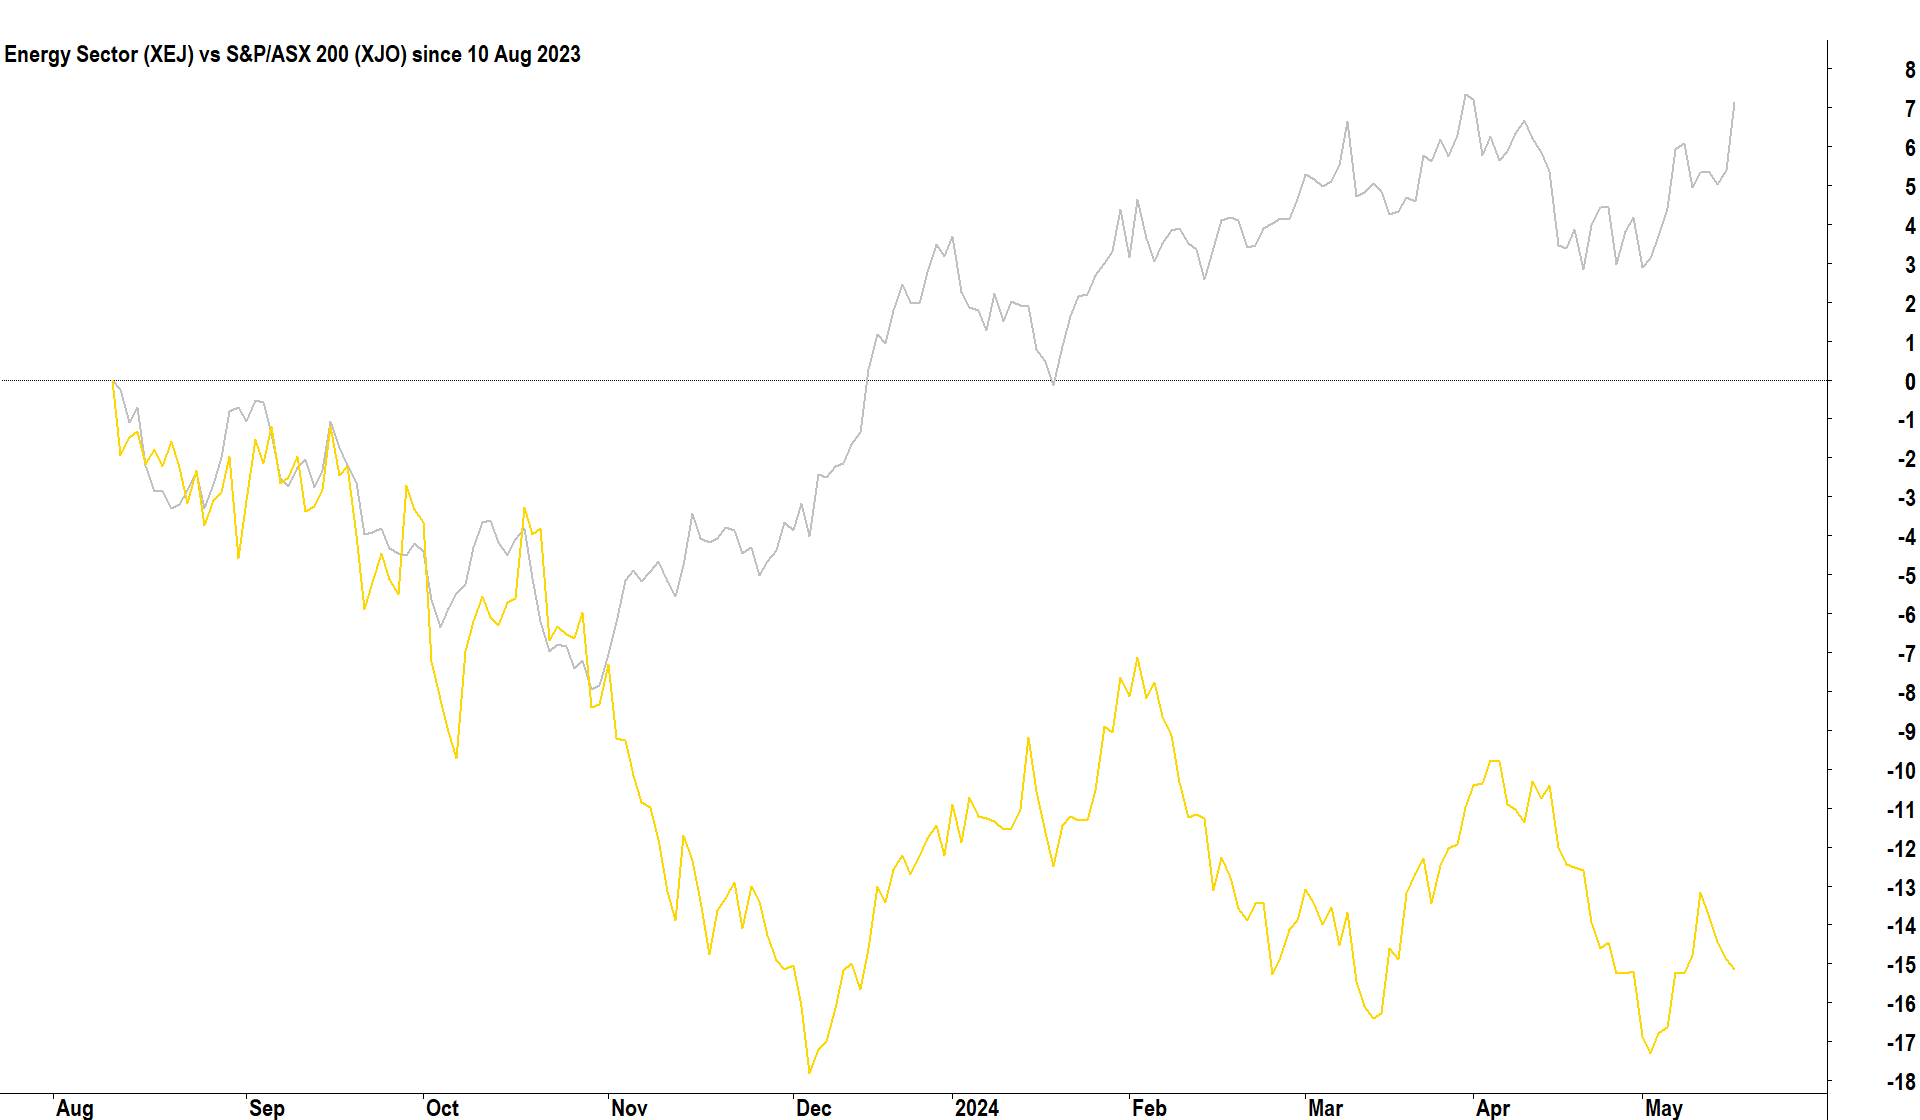 S&PASX 200 Energy Sector Index (XEJ) vs S&PASX200 Index (XJO) since 10 August 2023